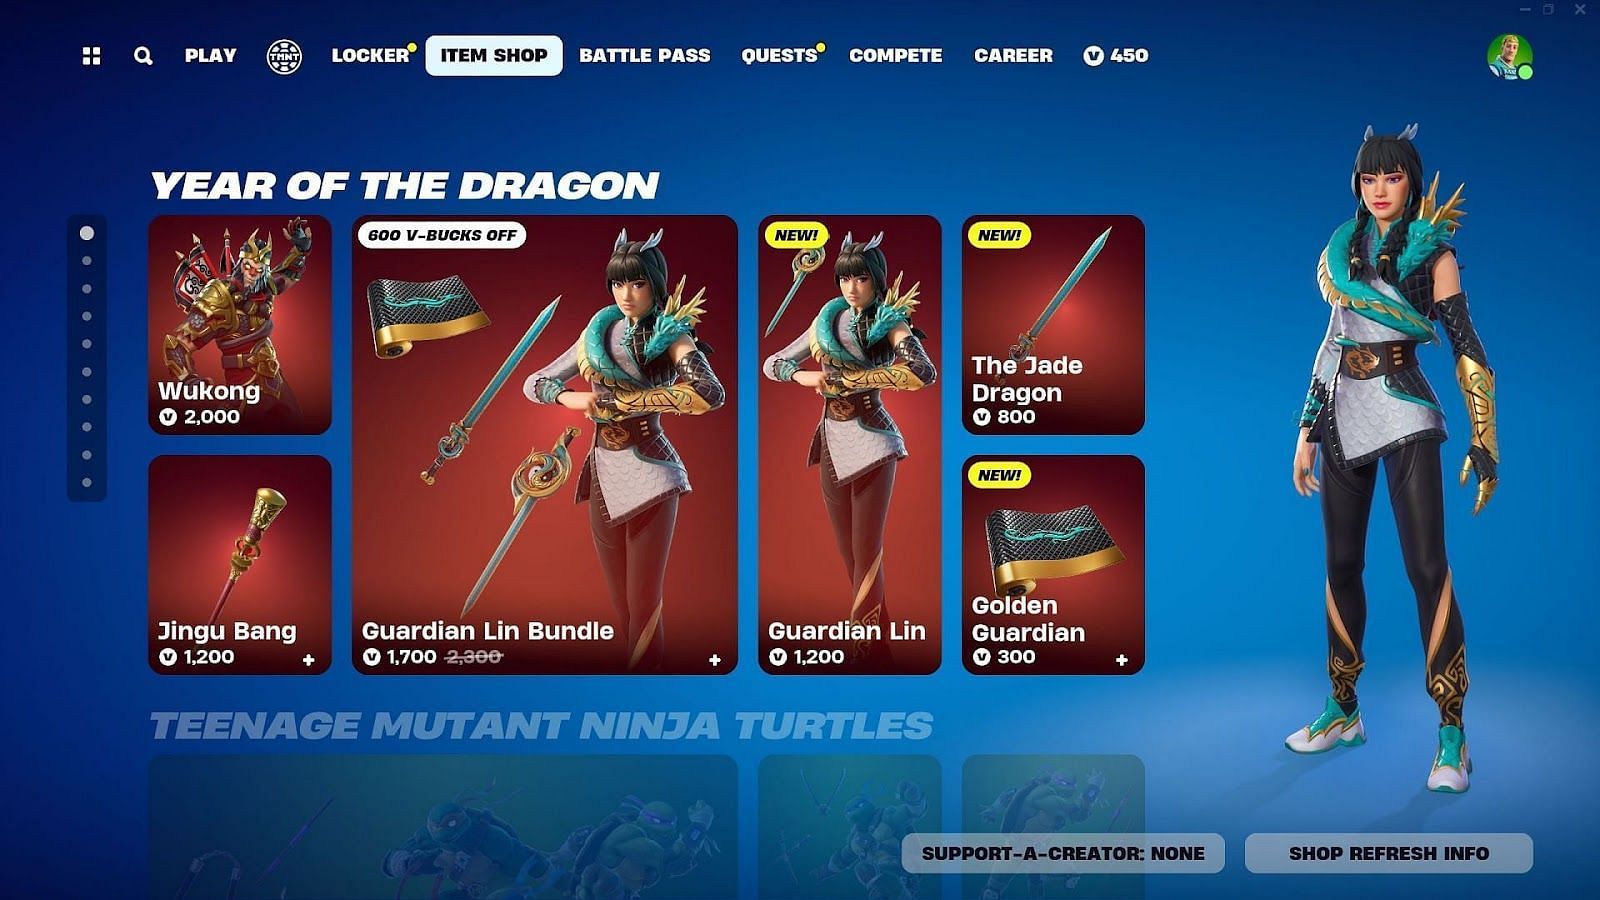 Guardian Lin is available in the Item Shop (Image via Epic Games)